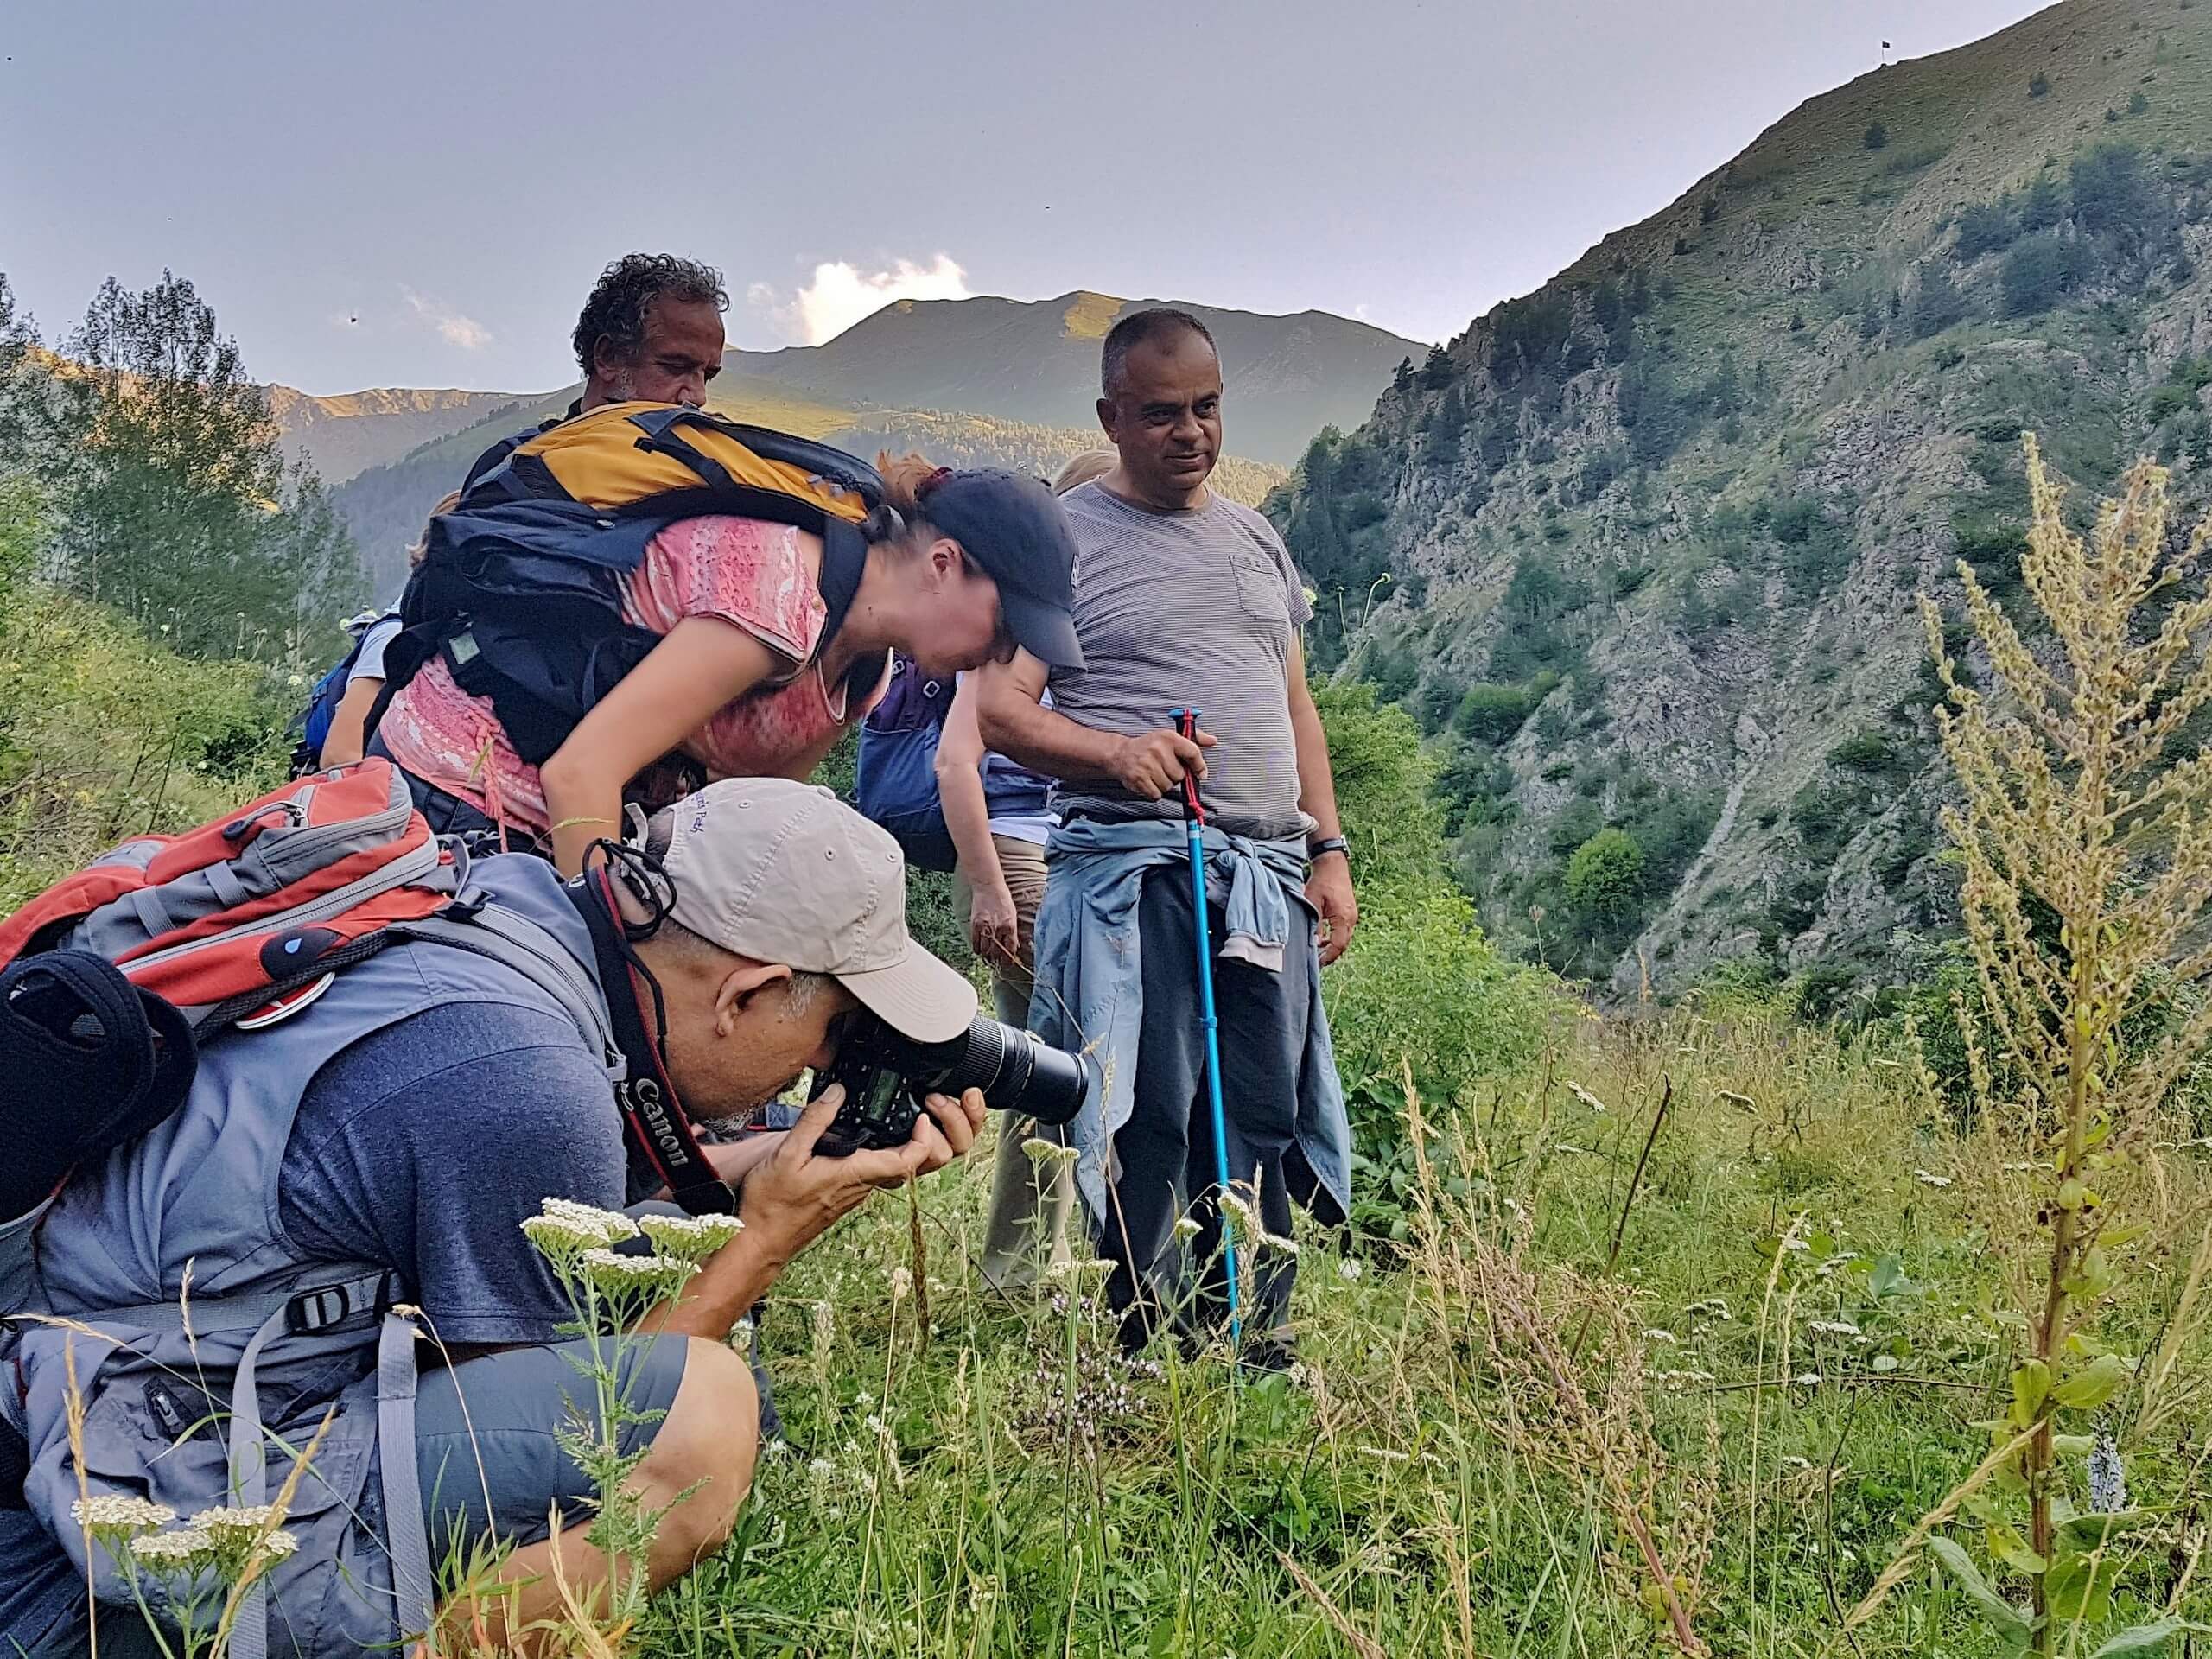 Hikers observing the plants in Pontic Alps, Turkey